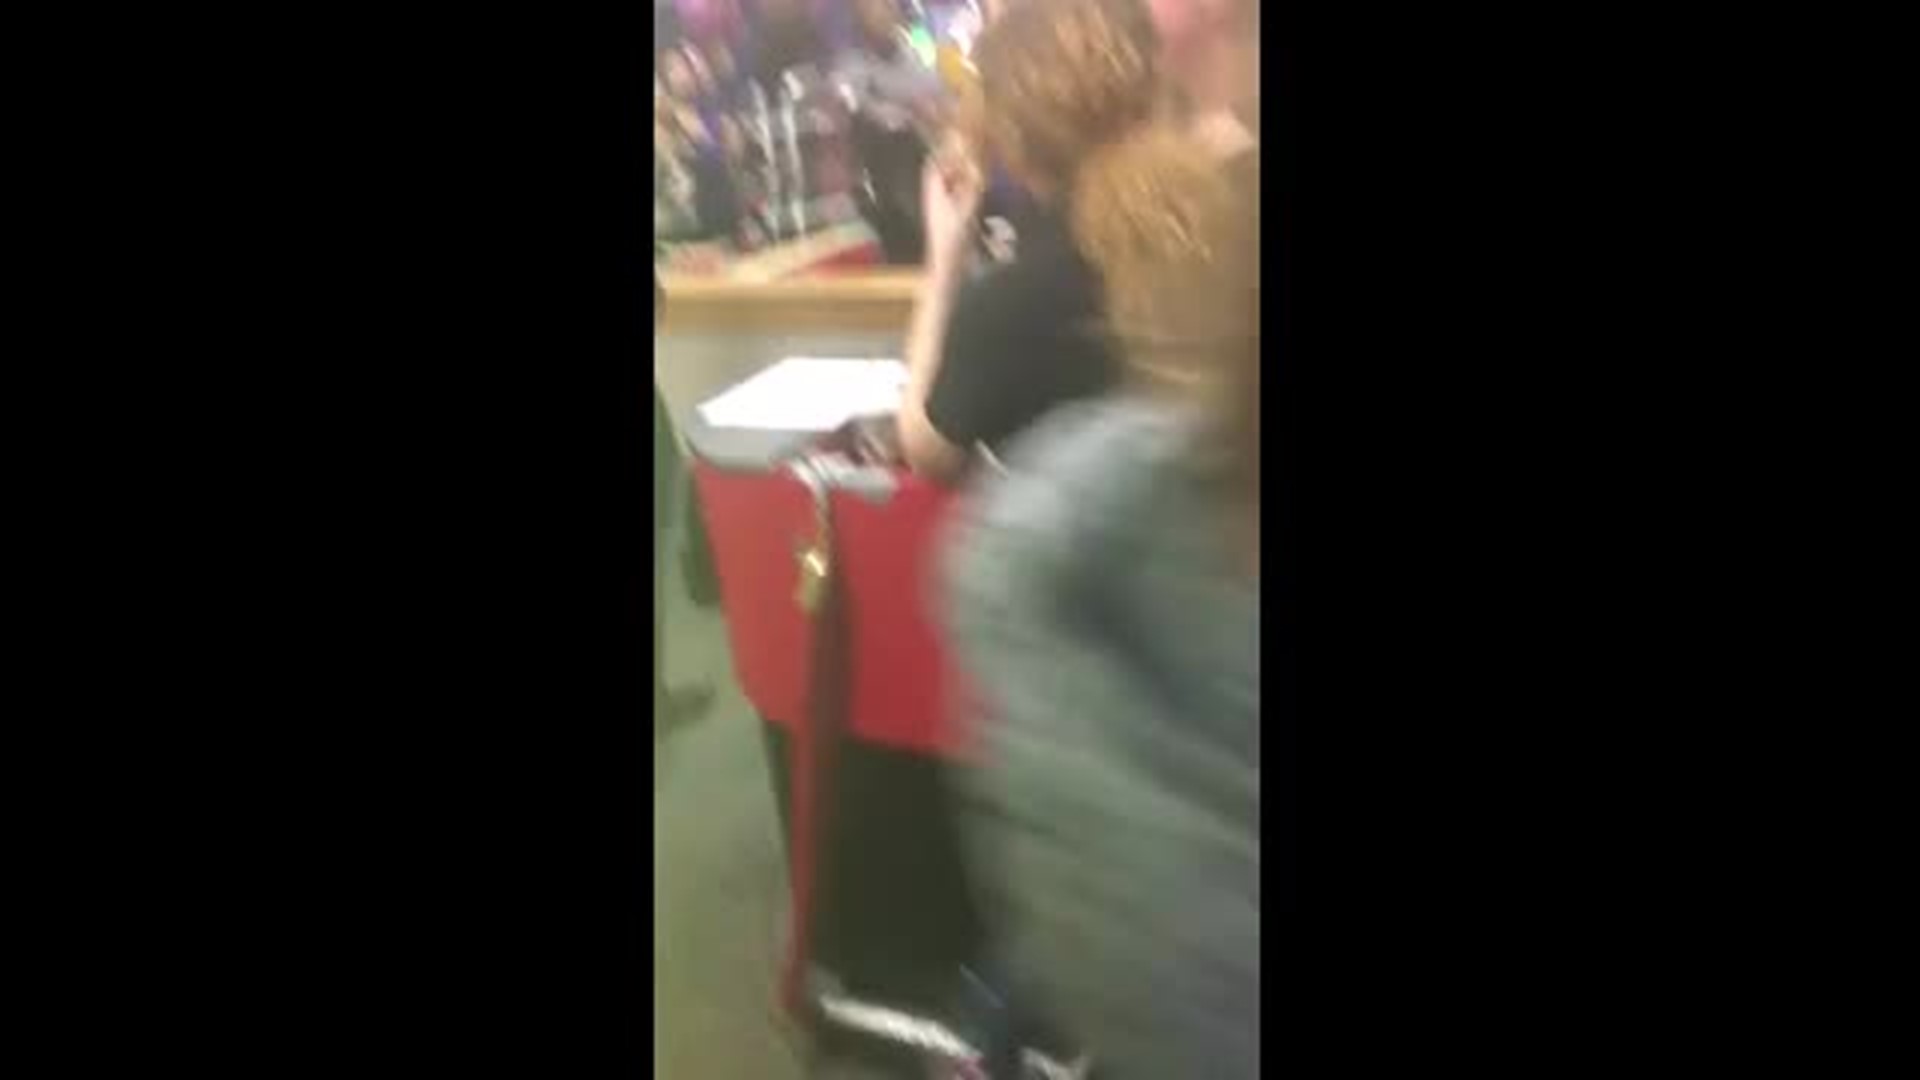 Fight breaks out at Manchester Chuck E. Cheese birthday party